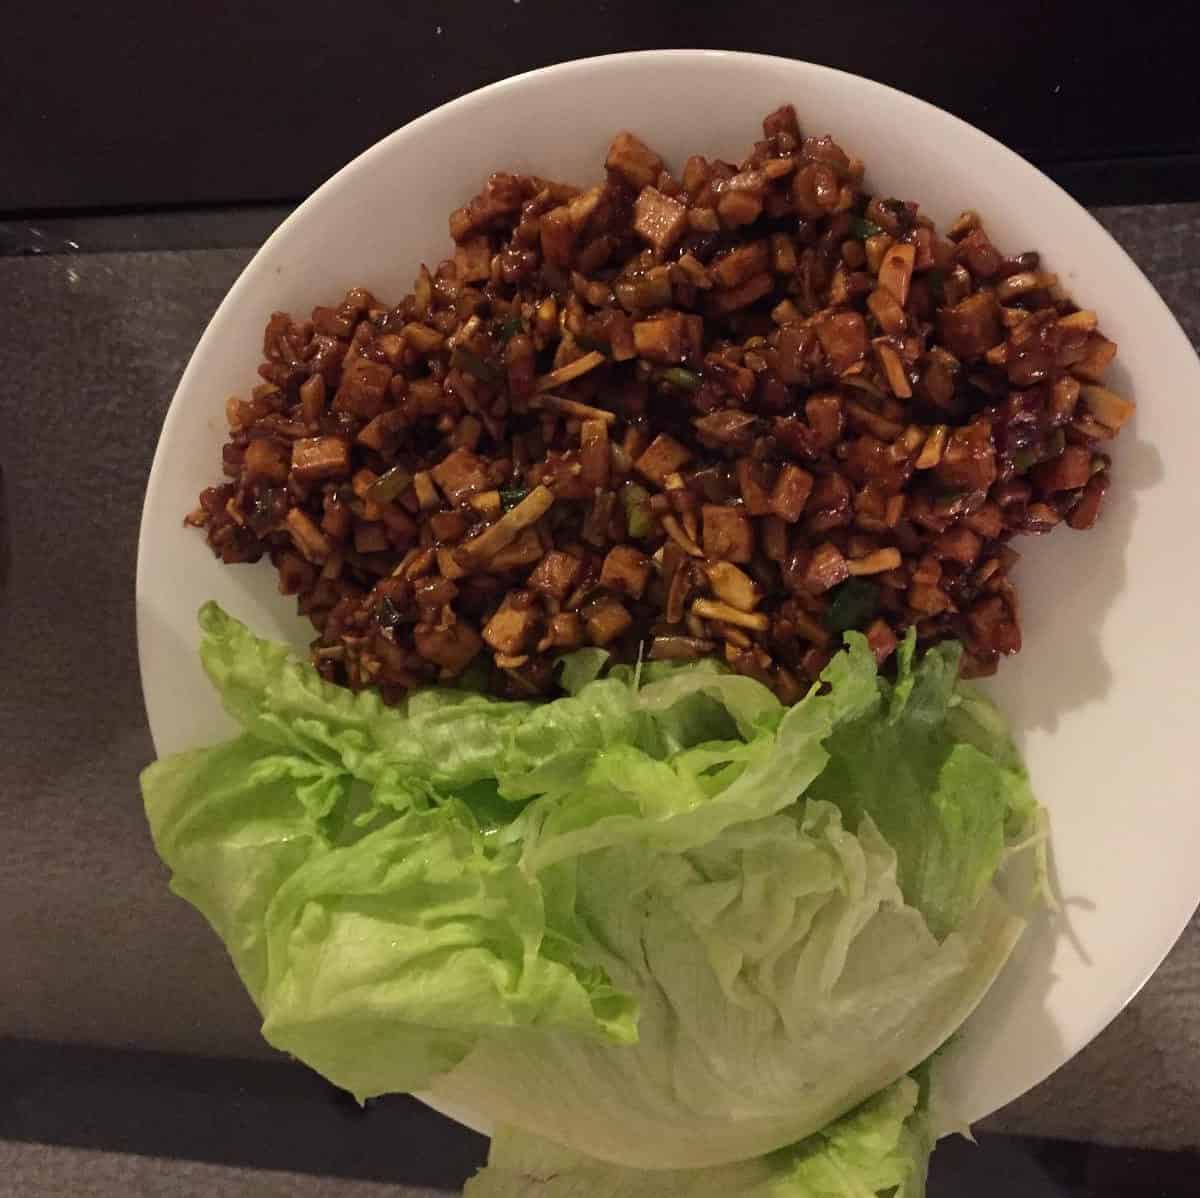  Step up your appetizer game with these flavorful and nutritious vegetarian lettuce wraps.